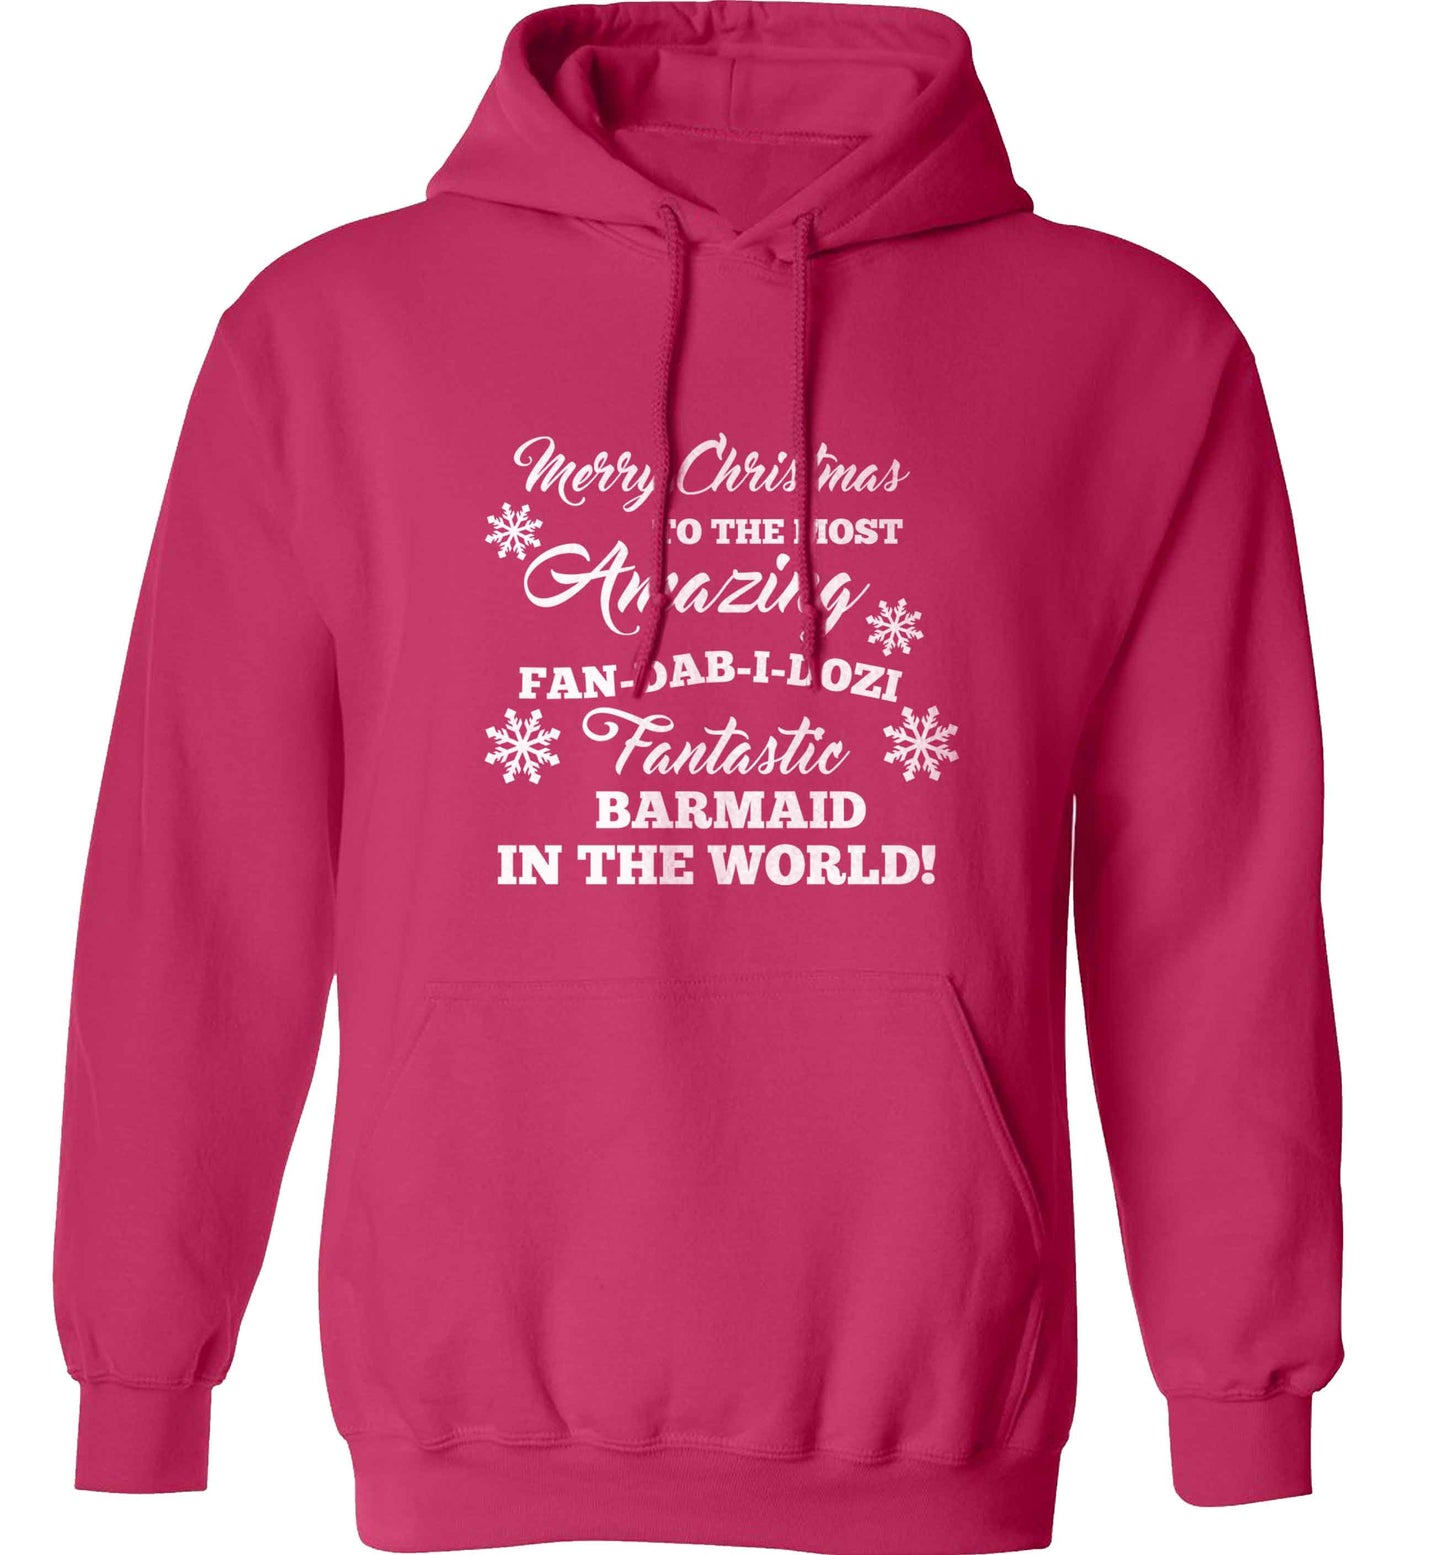 Merry Christmas to the most amazing barmaid in the world! adults unisex pink hoodie 2XL